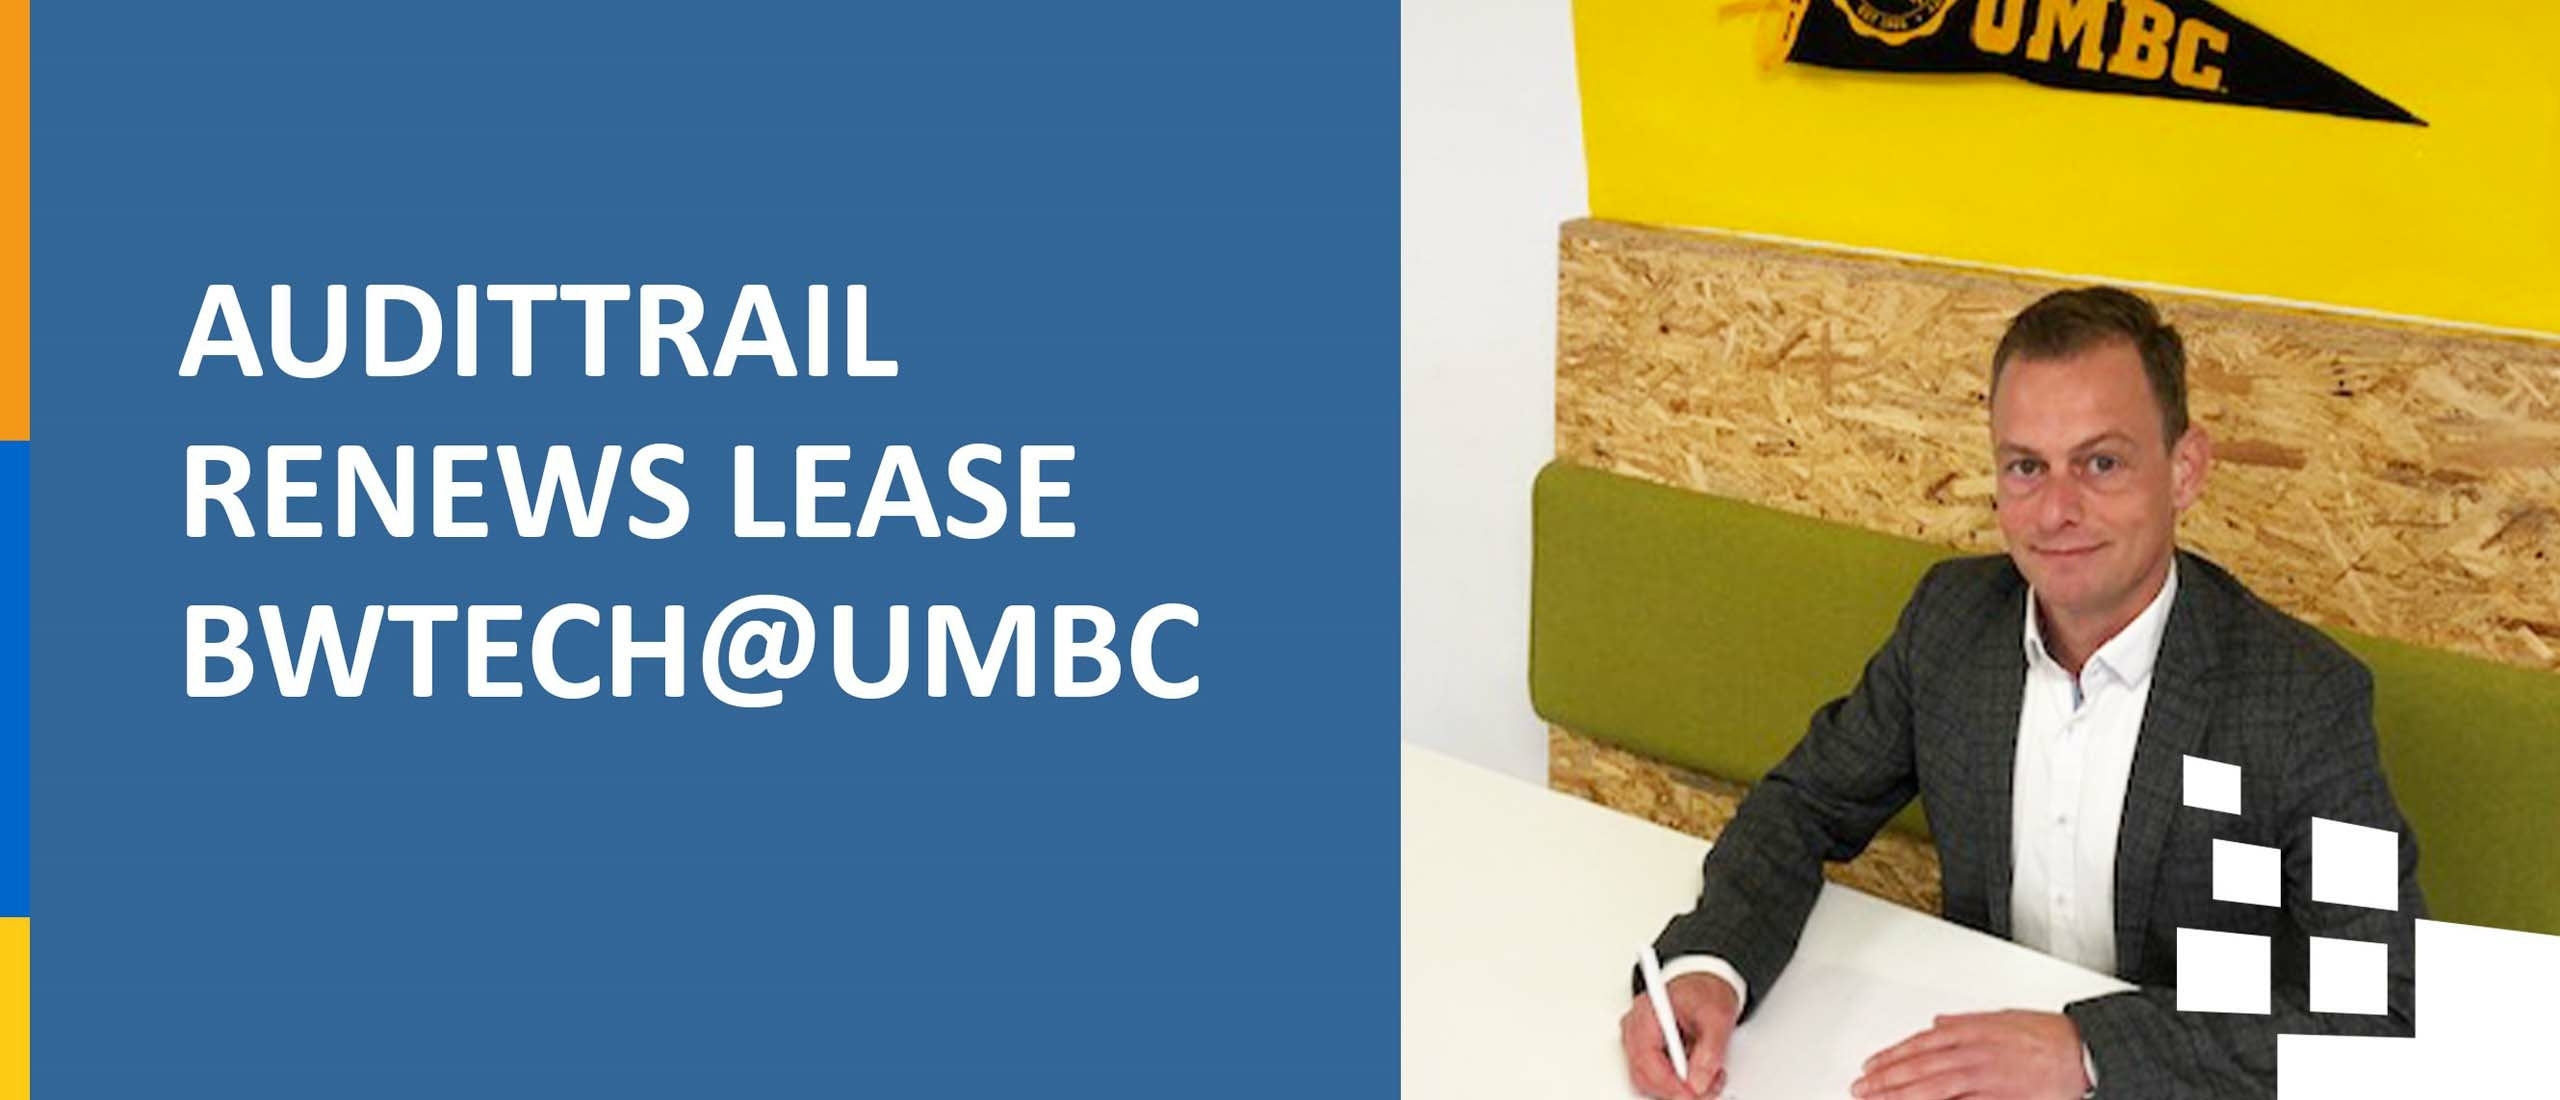 Audittrail Group renews lease at bwtech@UMBC